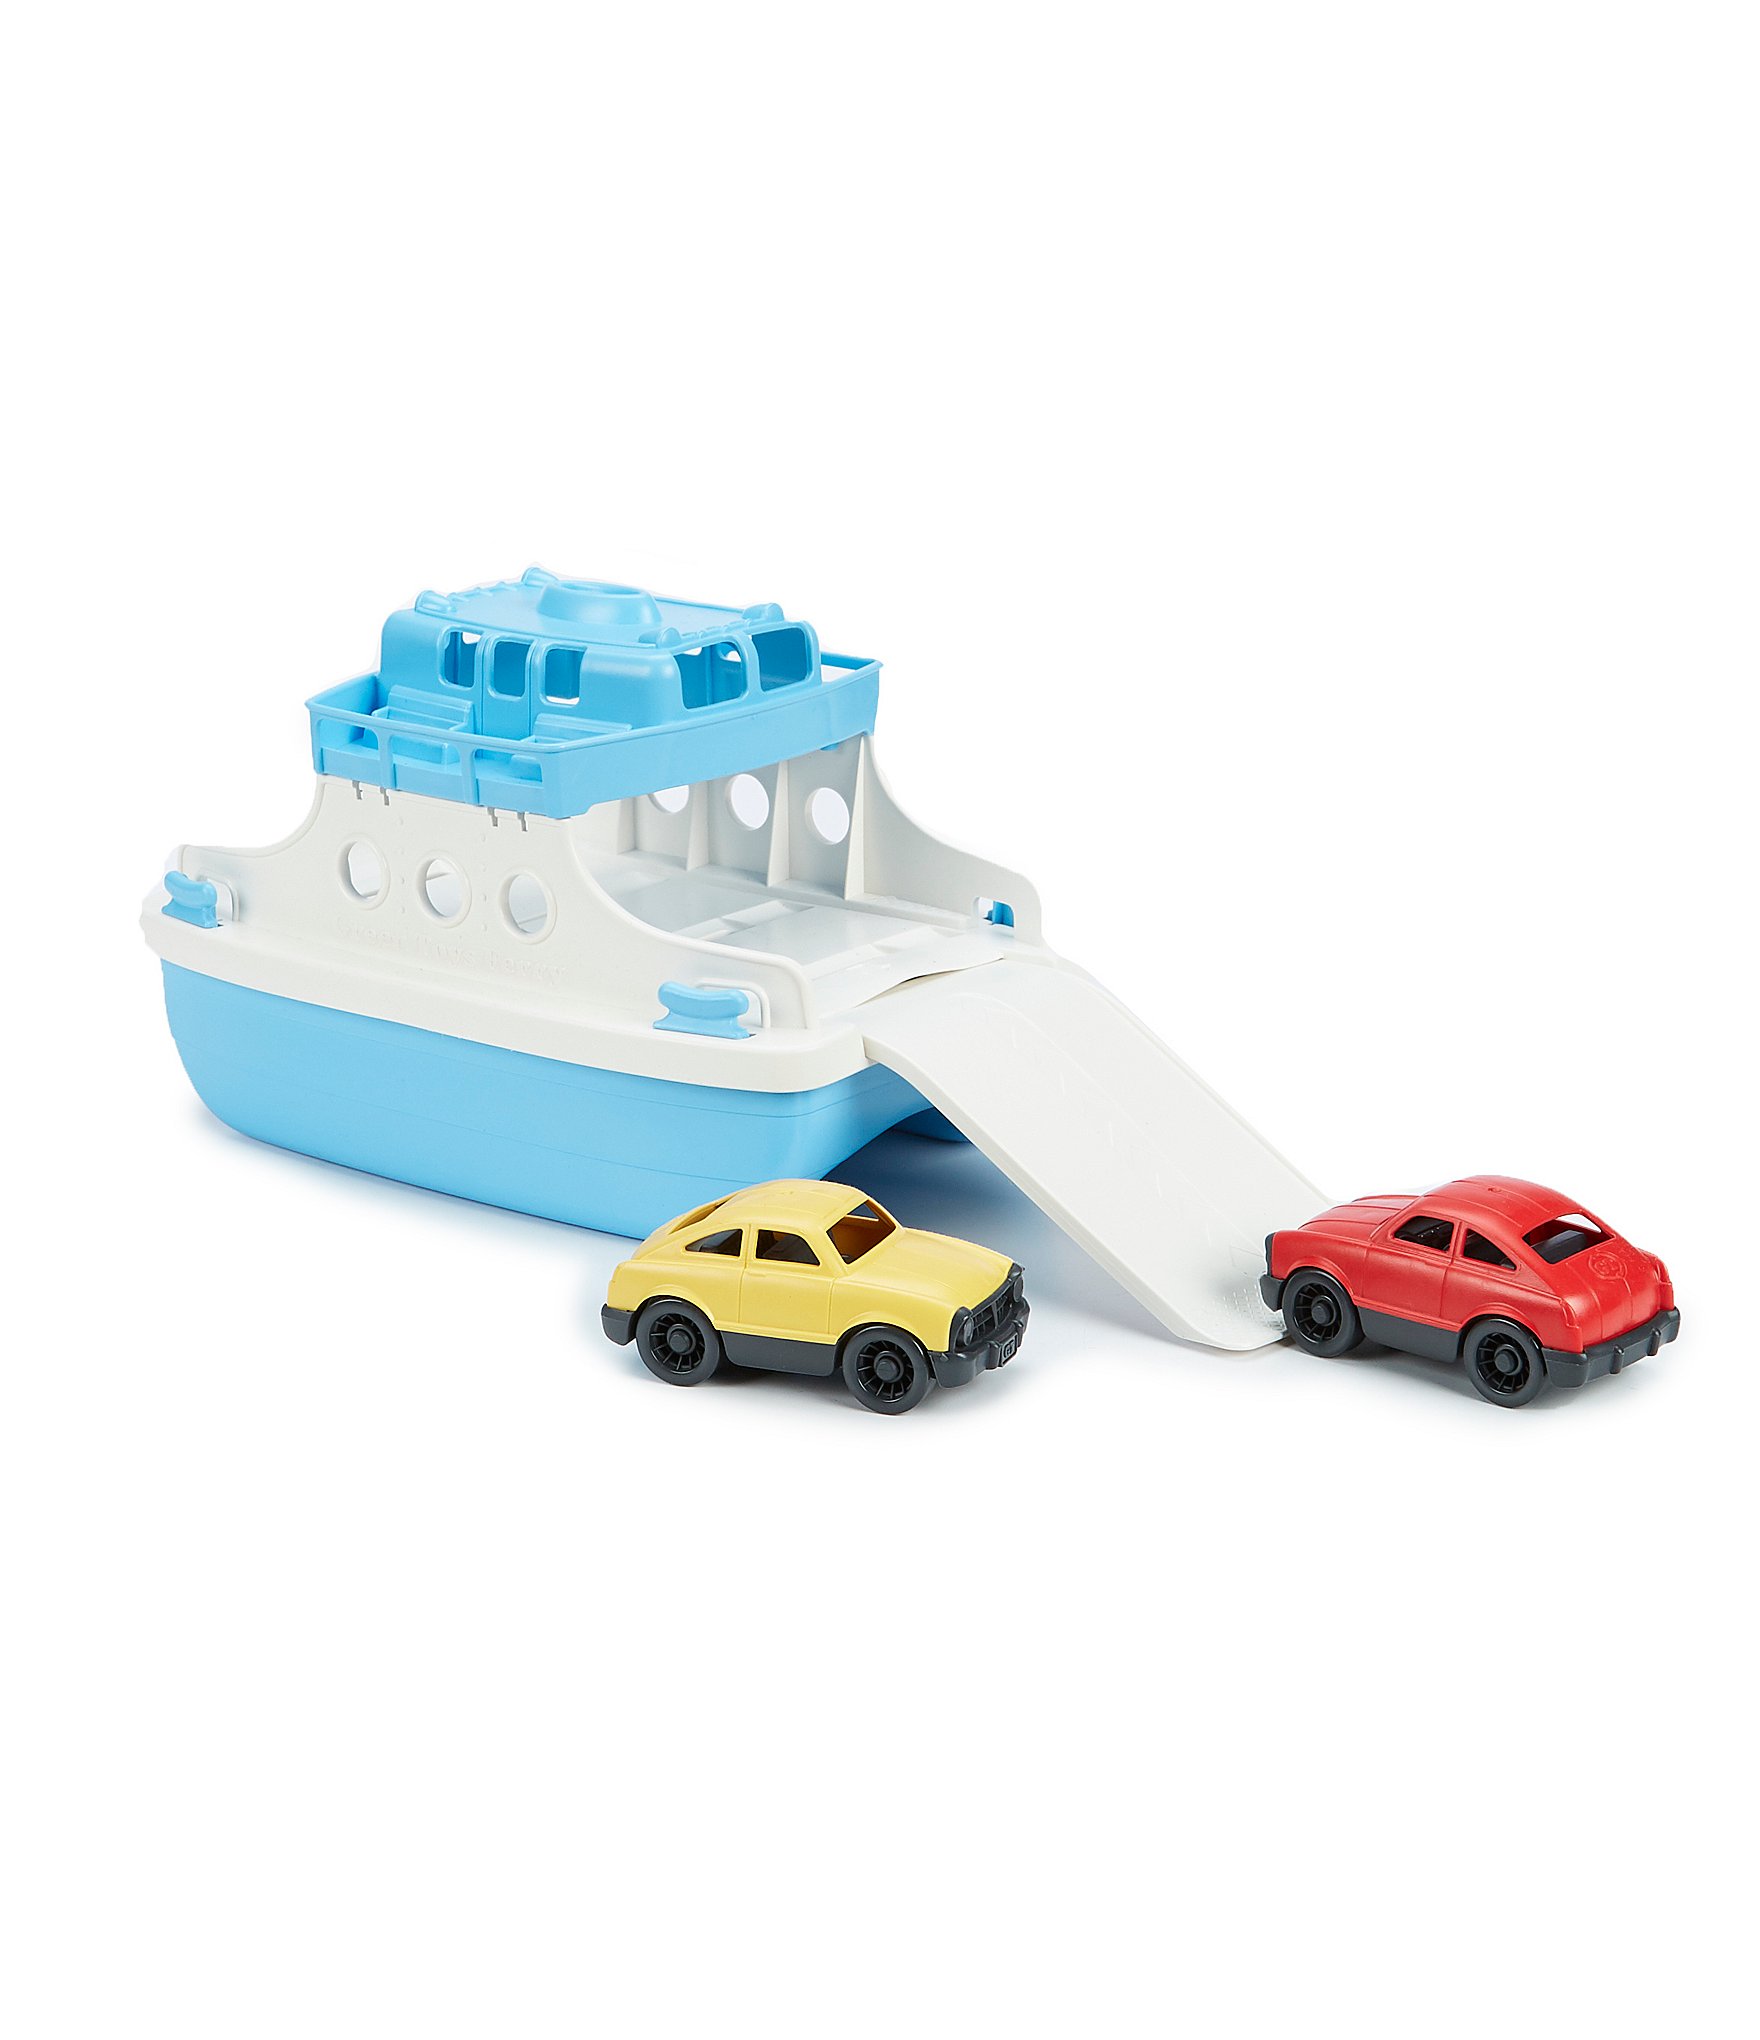 green toy ferry boat